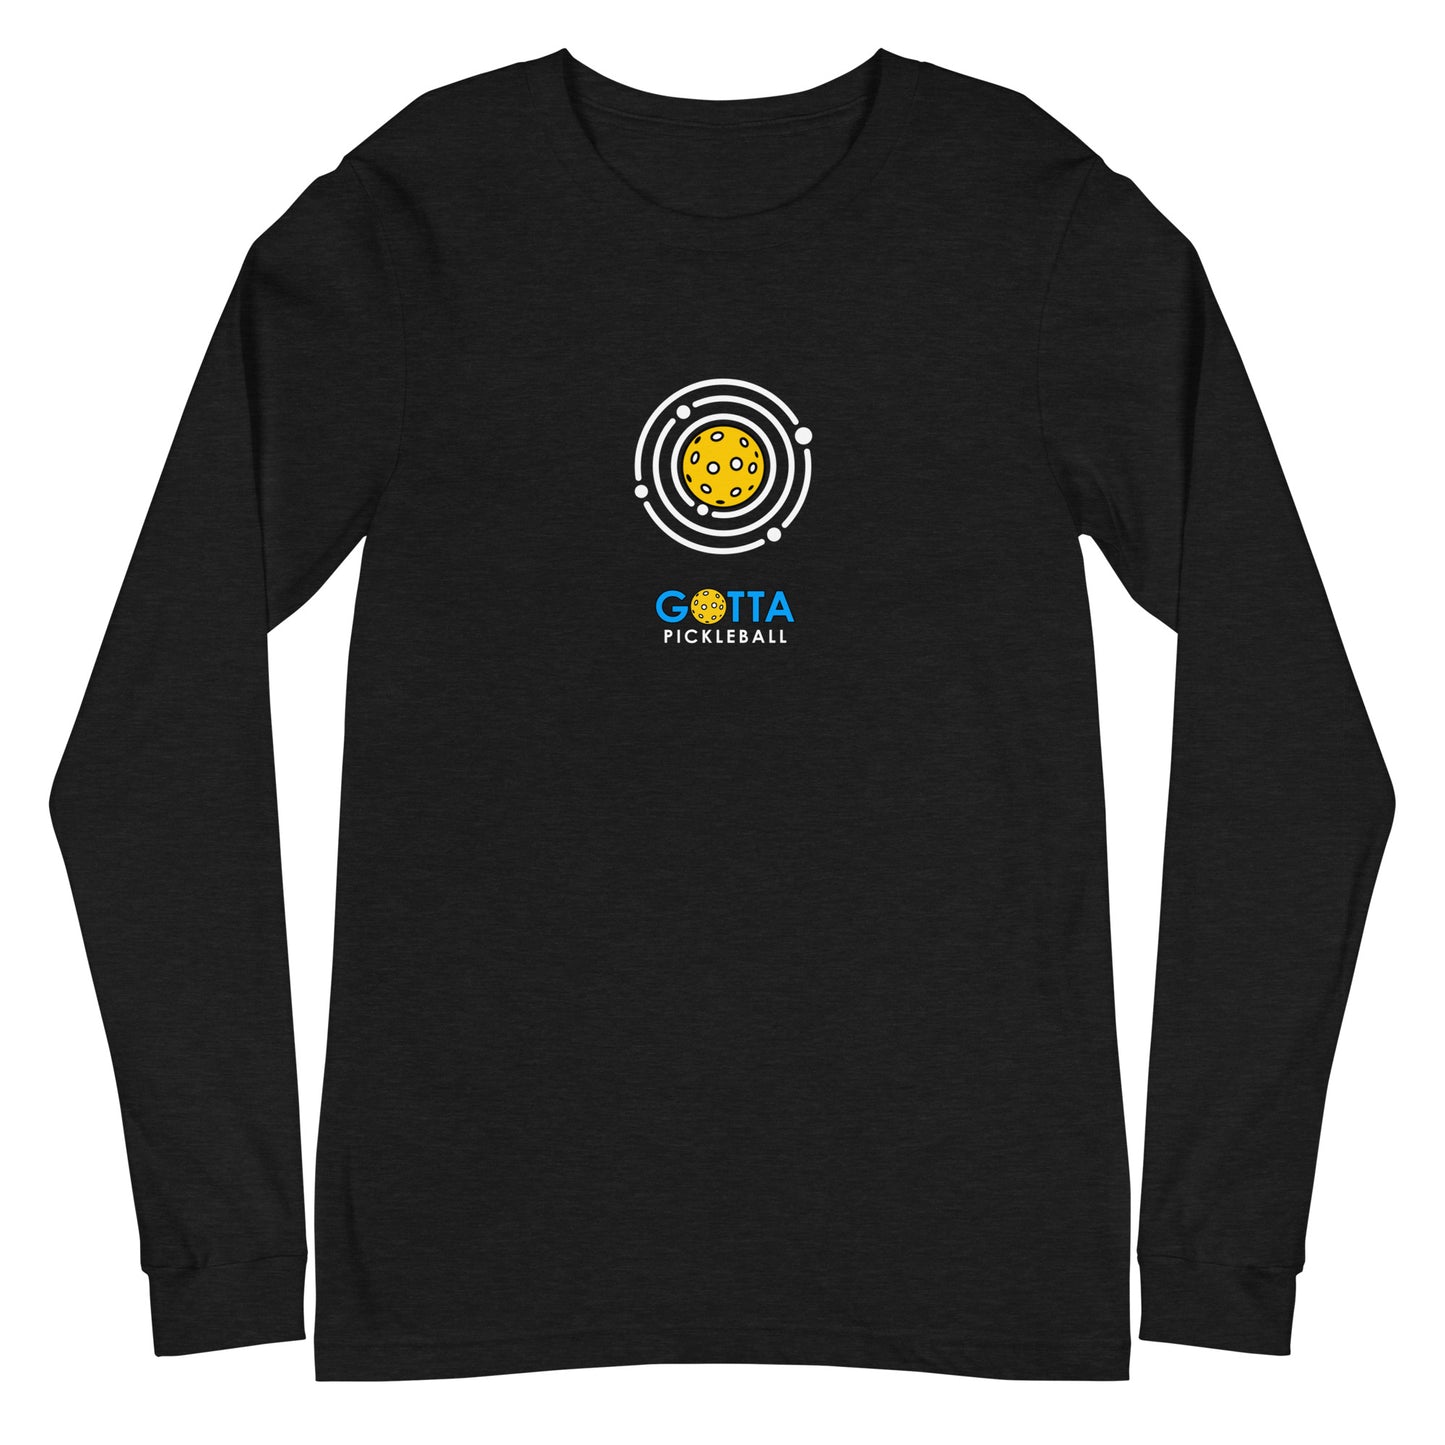 long sleeve tee black Gotta Pickleball logo blue and white with pickleball in center orbited with circles of white